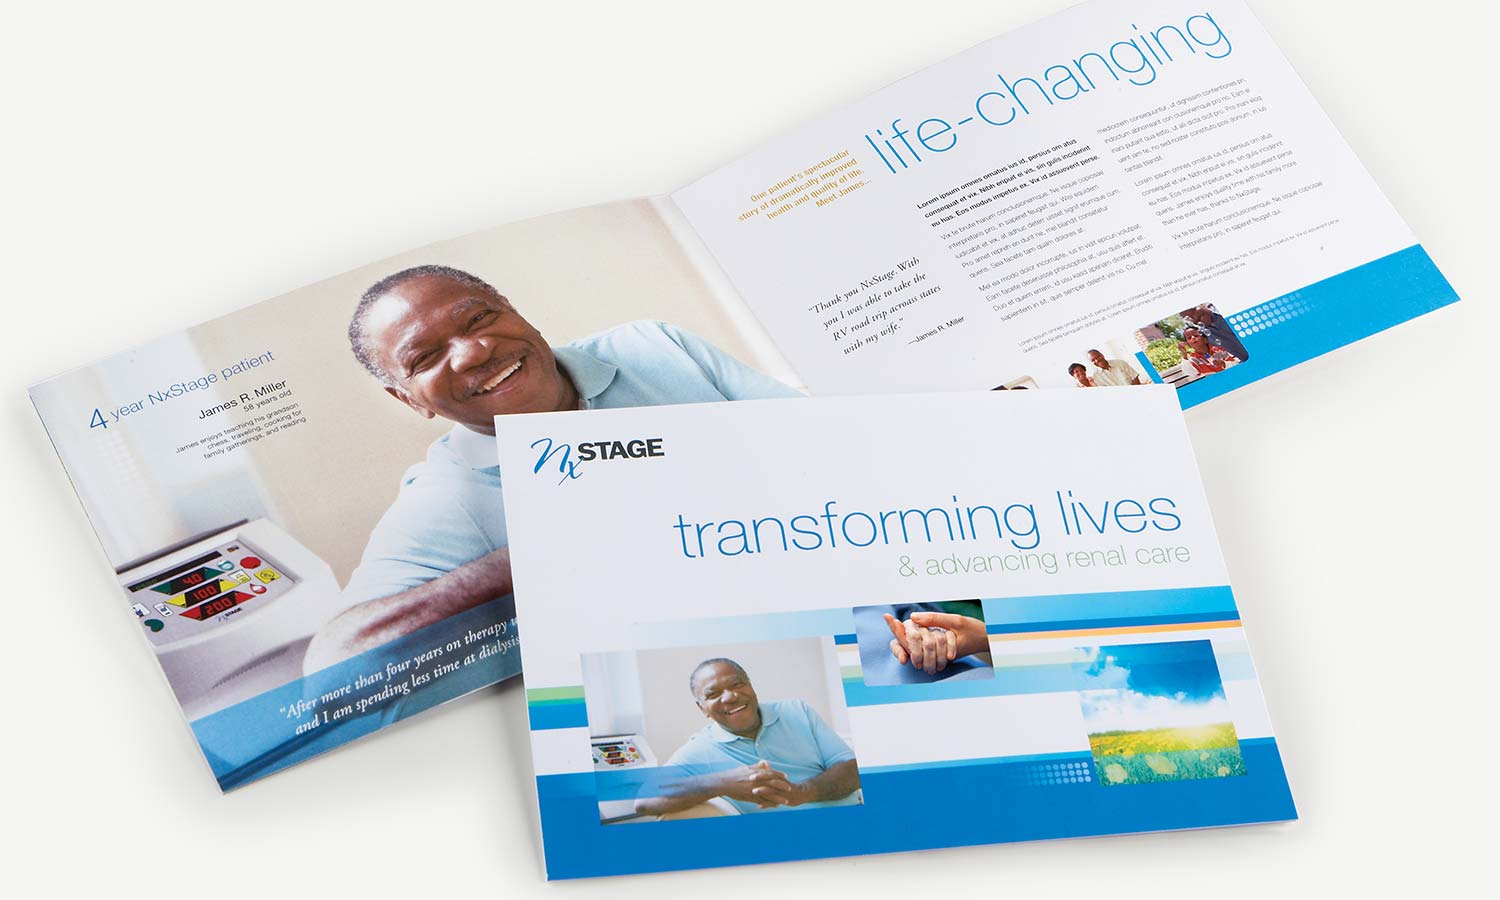 NxStage brochure with title "Transforming Lives"